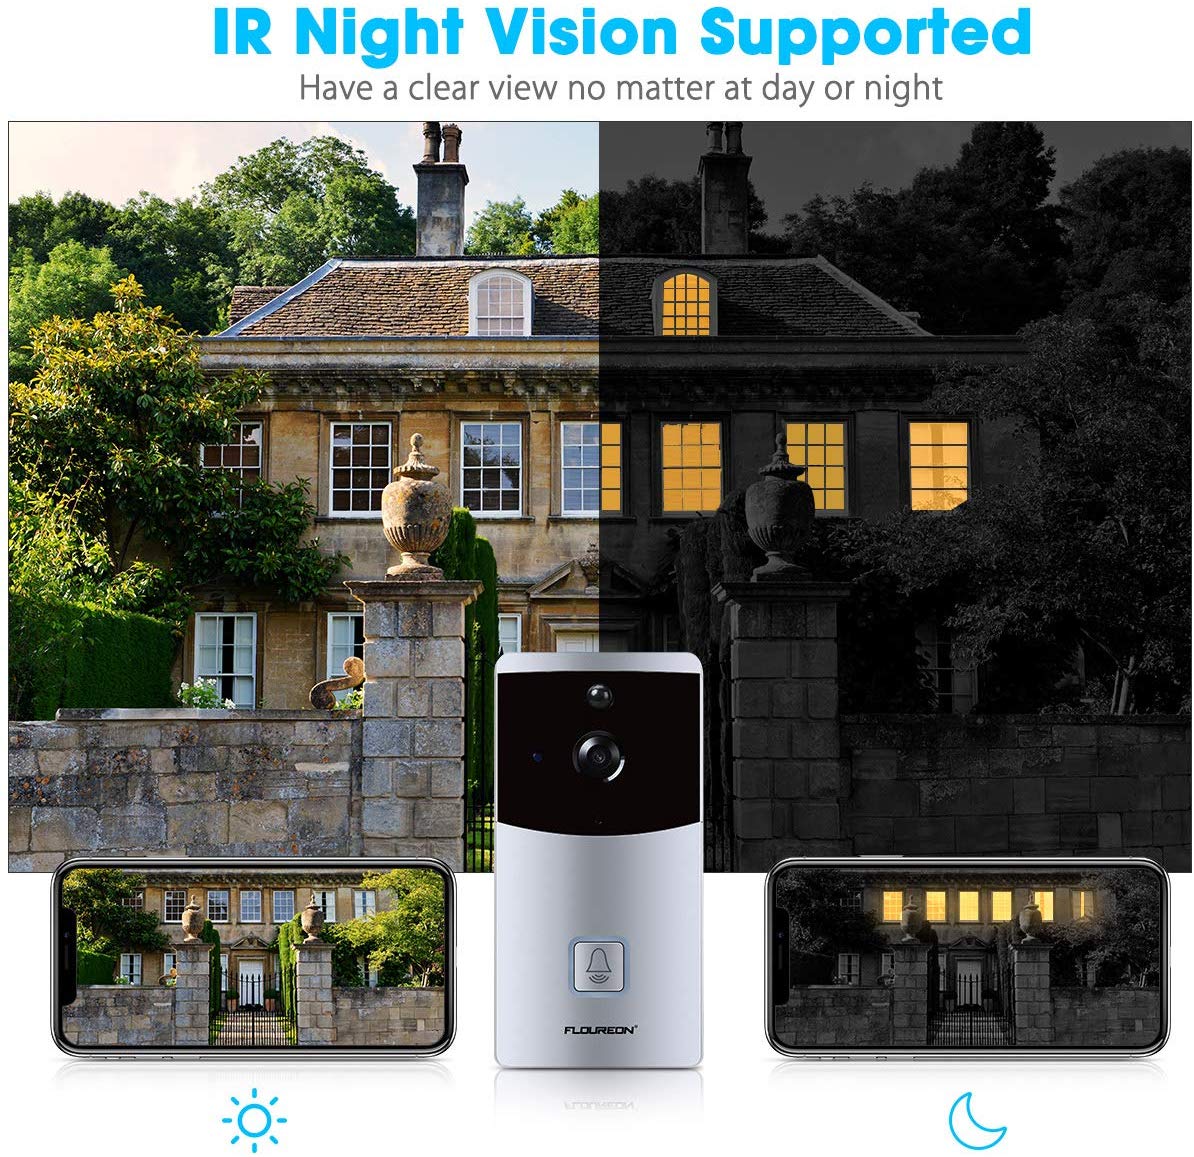 FLOUREON Wi-Fi Video Doorbell Camera 720P HD Home Security Camera with Two-Way Talk & Video,Infrared Night Vision,PIR Motion Detection Wireless Doorbell for iOS Android - image 5 of 8